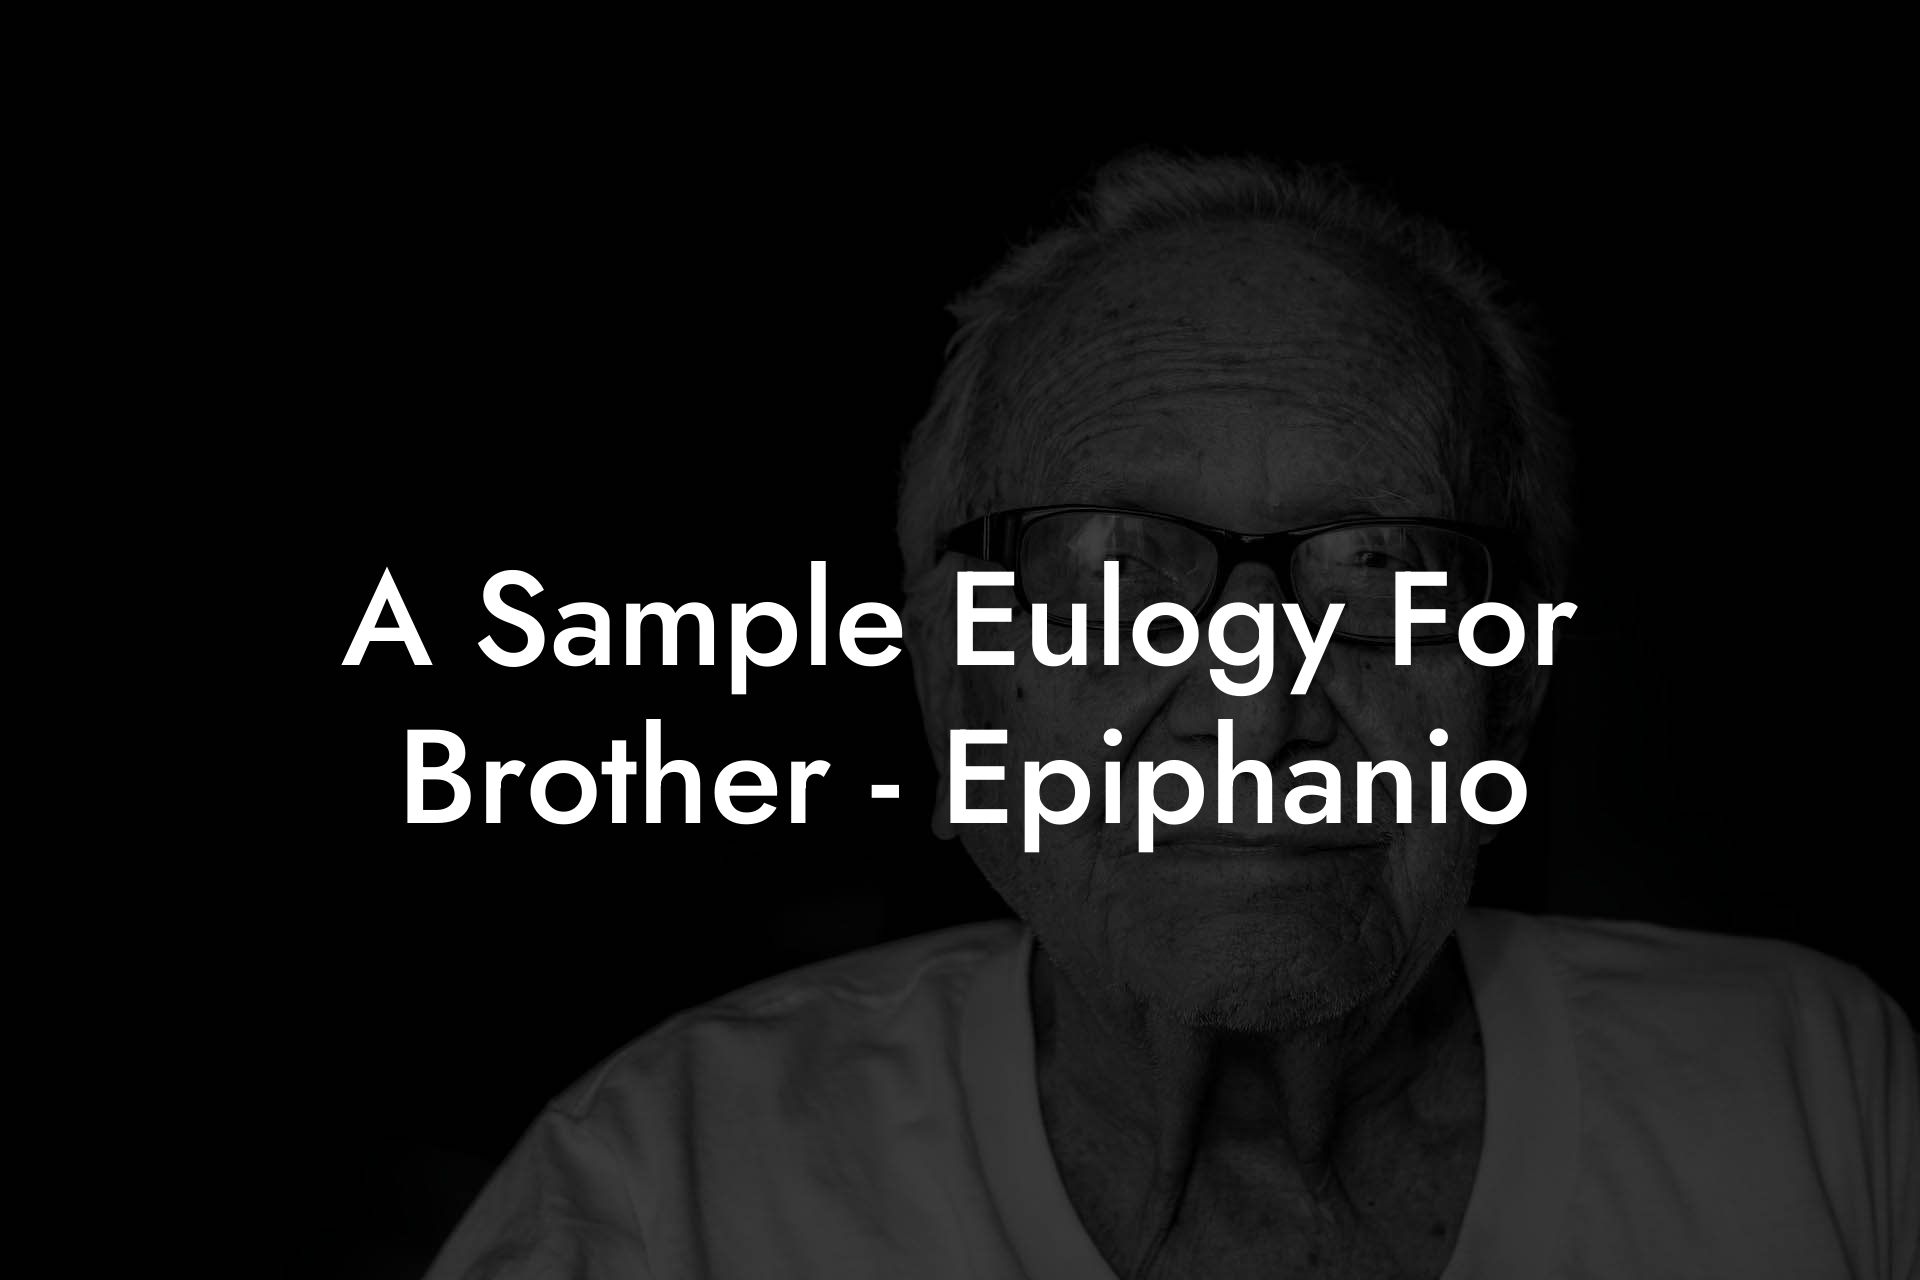 A Sample Eulogy For Brother - Epiphanio